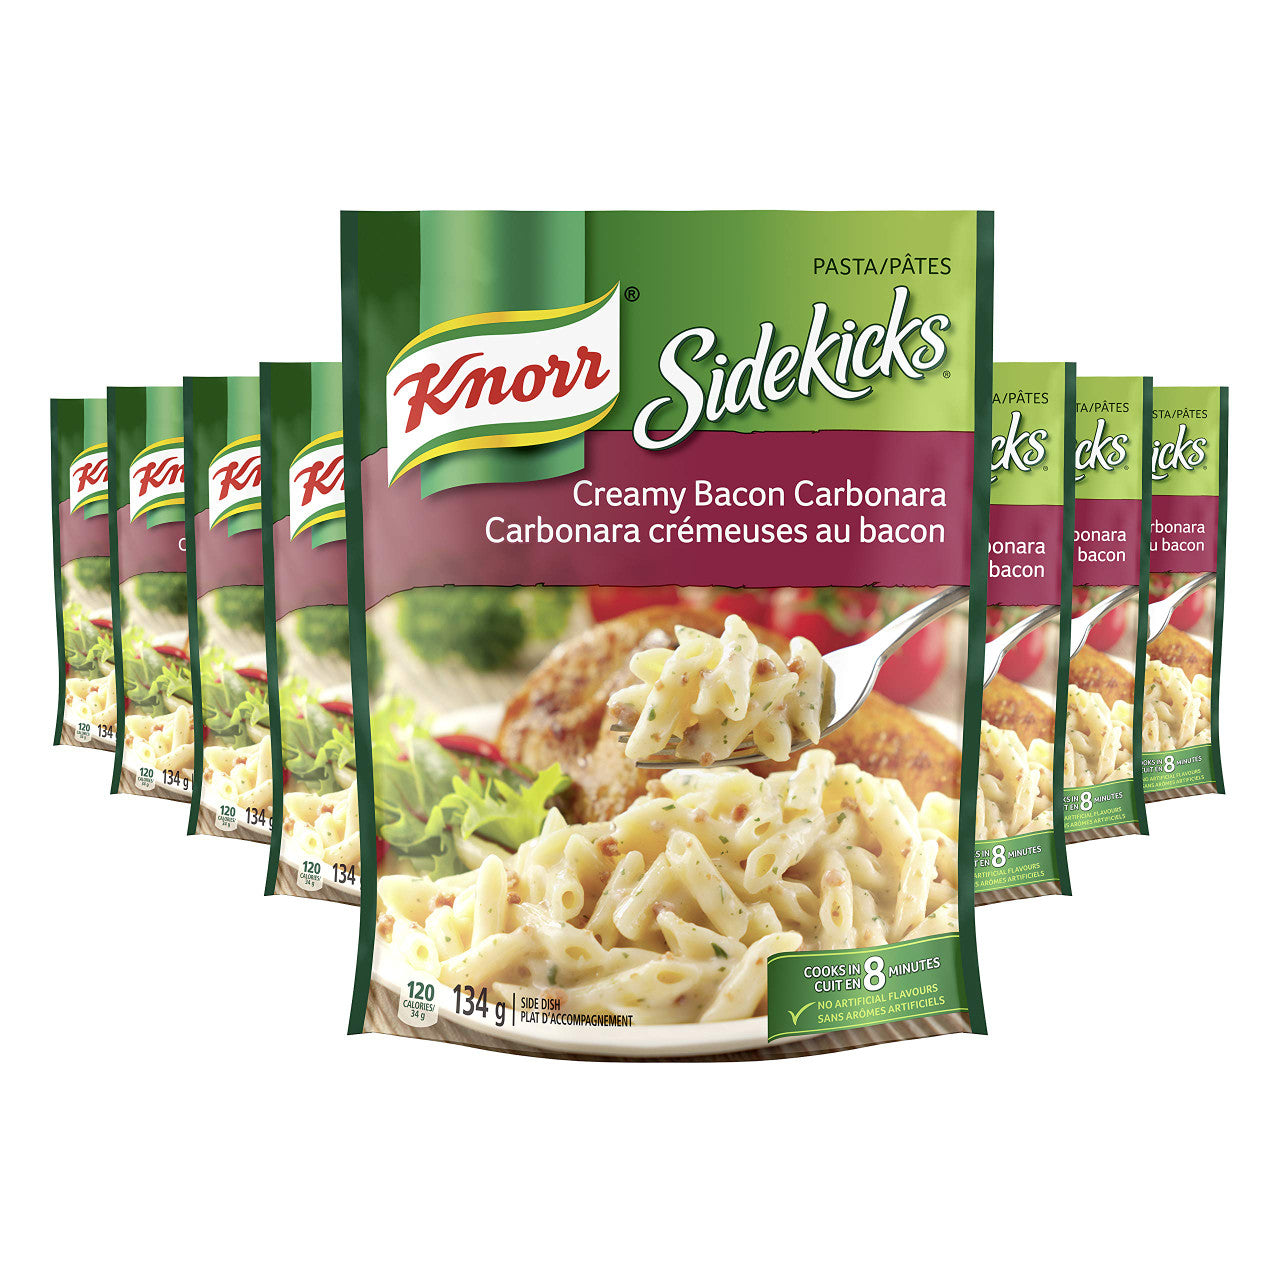 Knorr Sidekicks Creamy Bacon Carbonara Pasta 134g/4.72 Ounces 8ct {Imported from Canada}